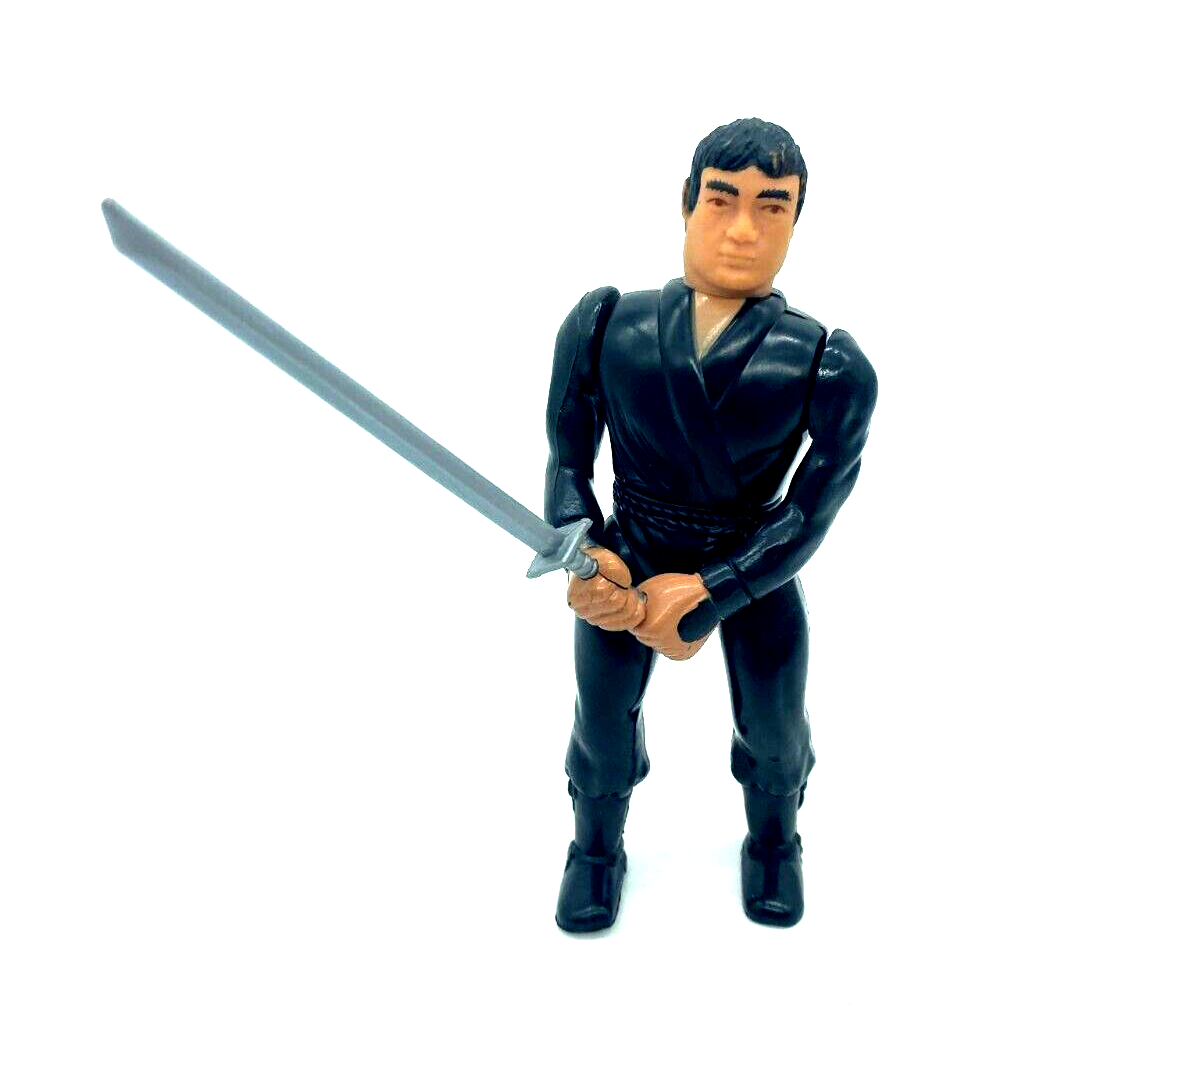 Karate Kid figure by Remco, possibly different line